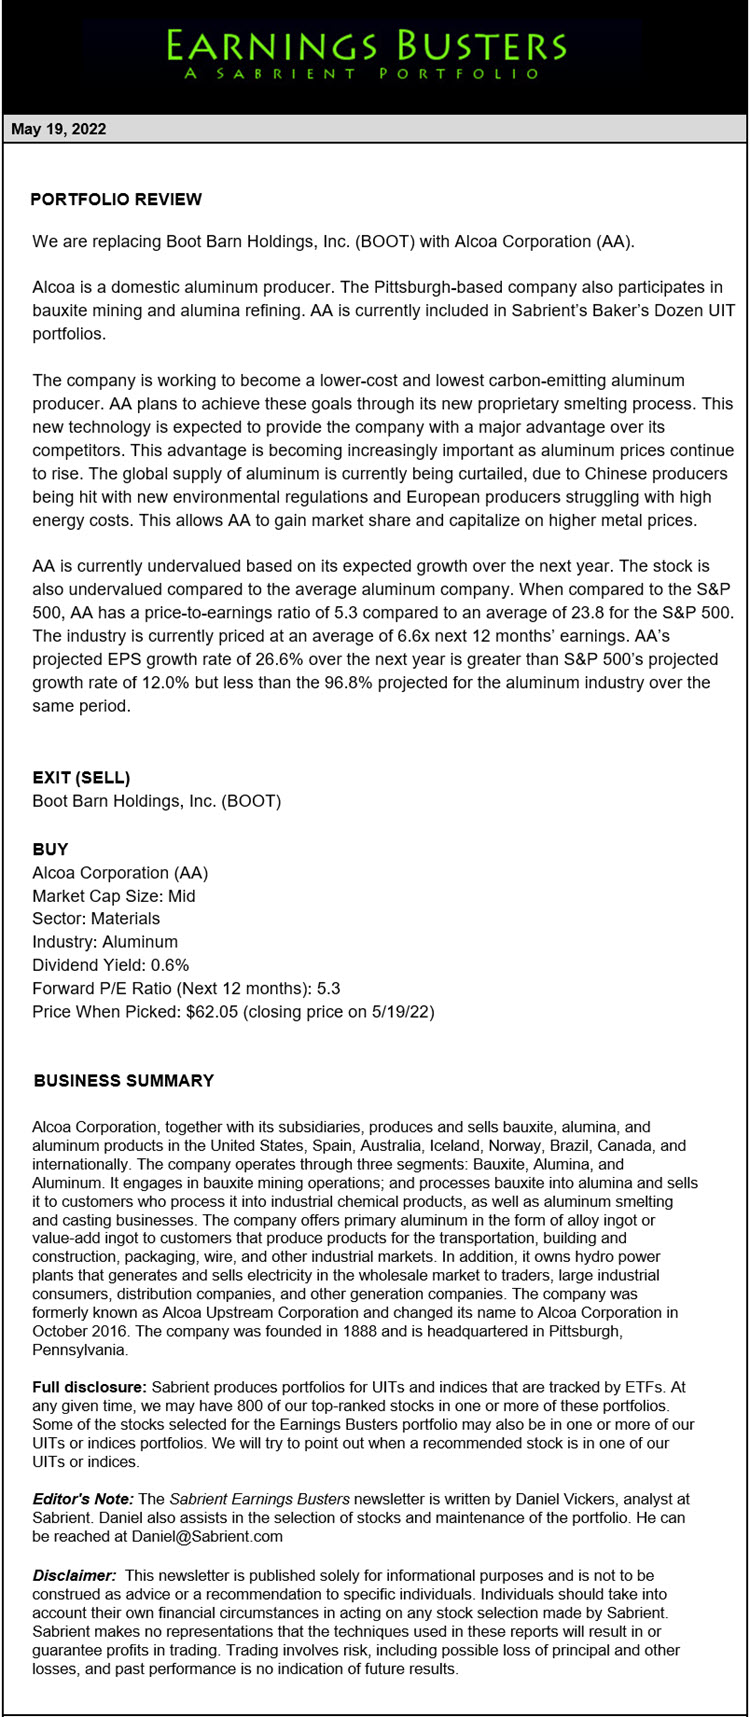 Earnings Busters Newsletter - May 19, 2022